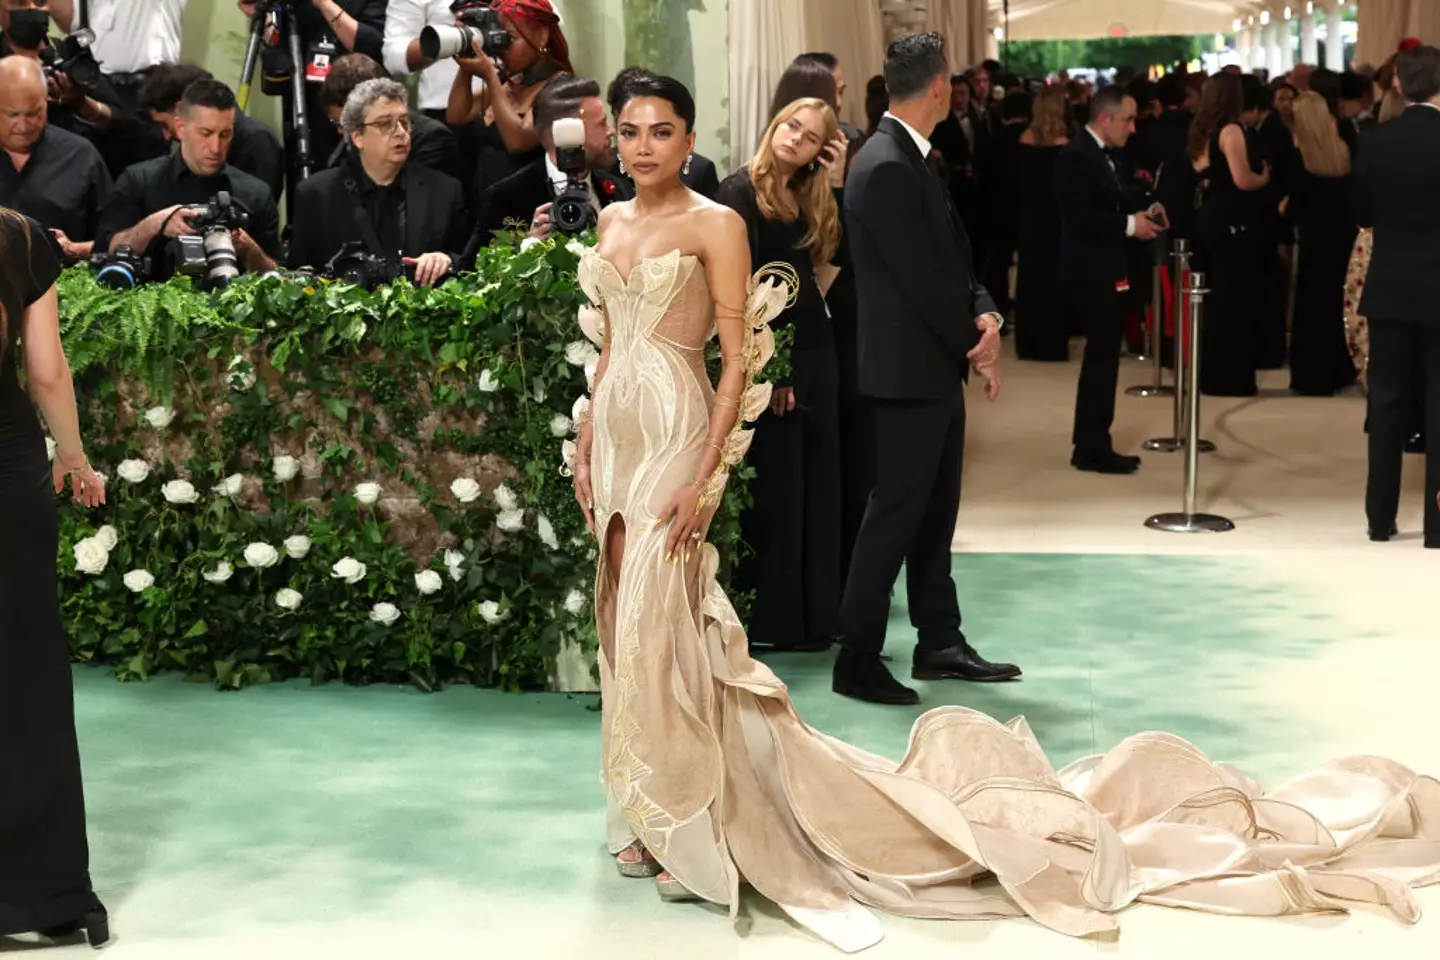 Mona Patel stole the show at the Met Gala. Marleen Moise/Getty Images